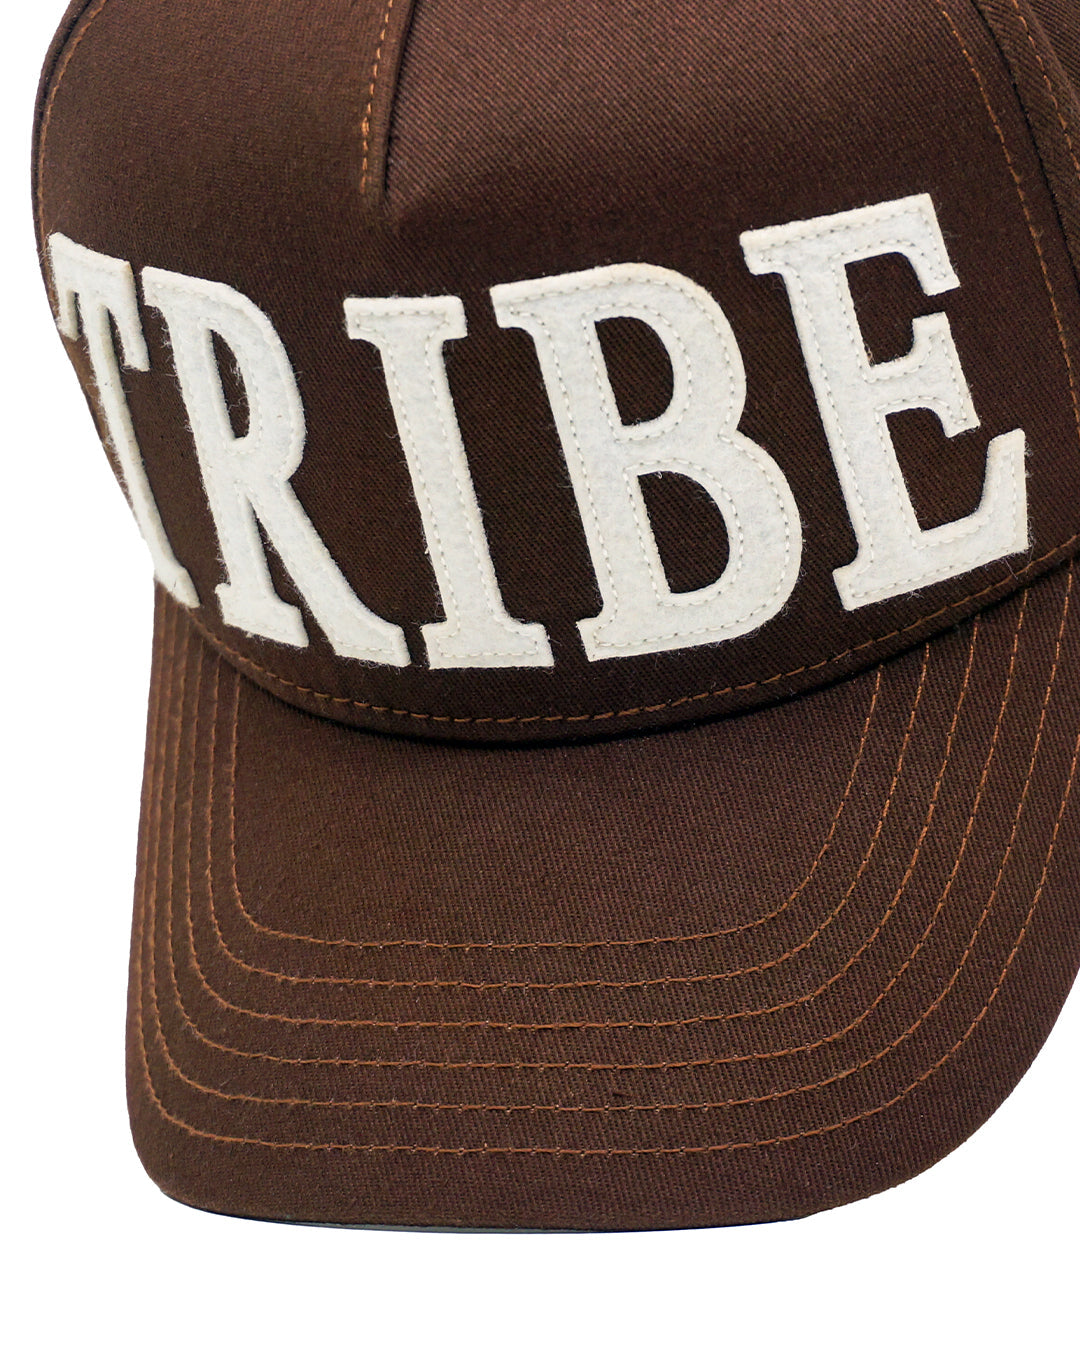 Triibe HAT OS "TRIBE" hat — Chocolate [PRE-ORDER]